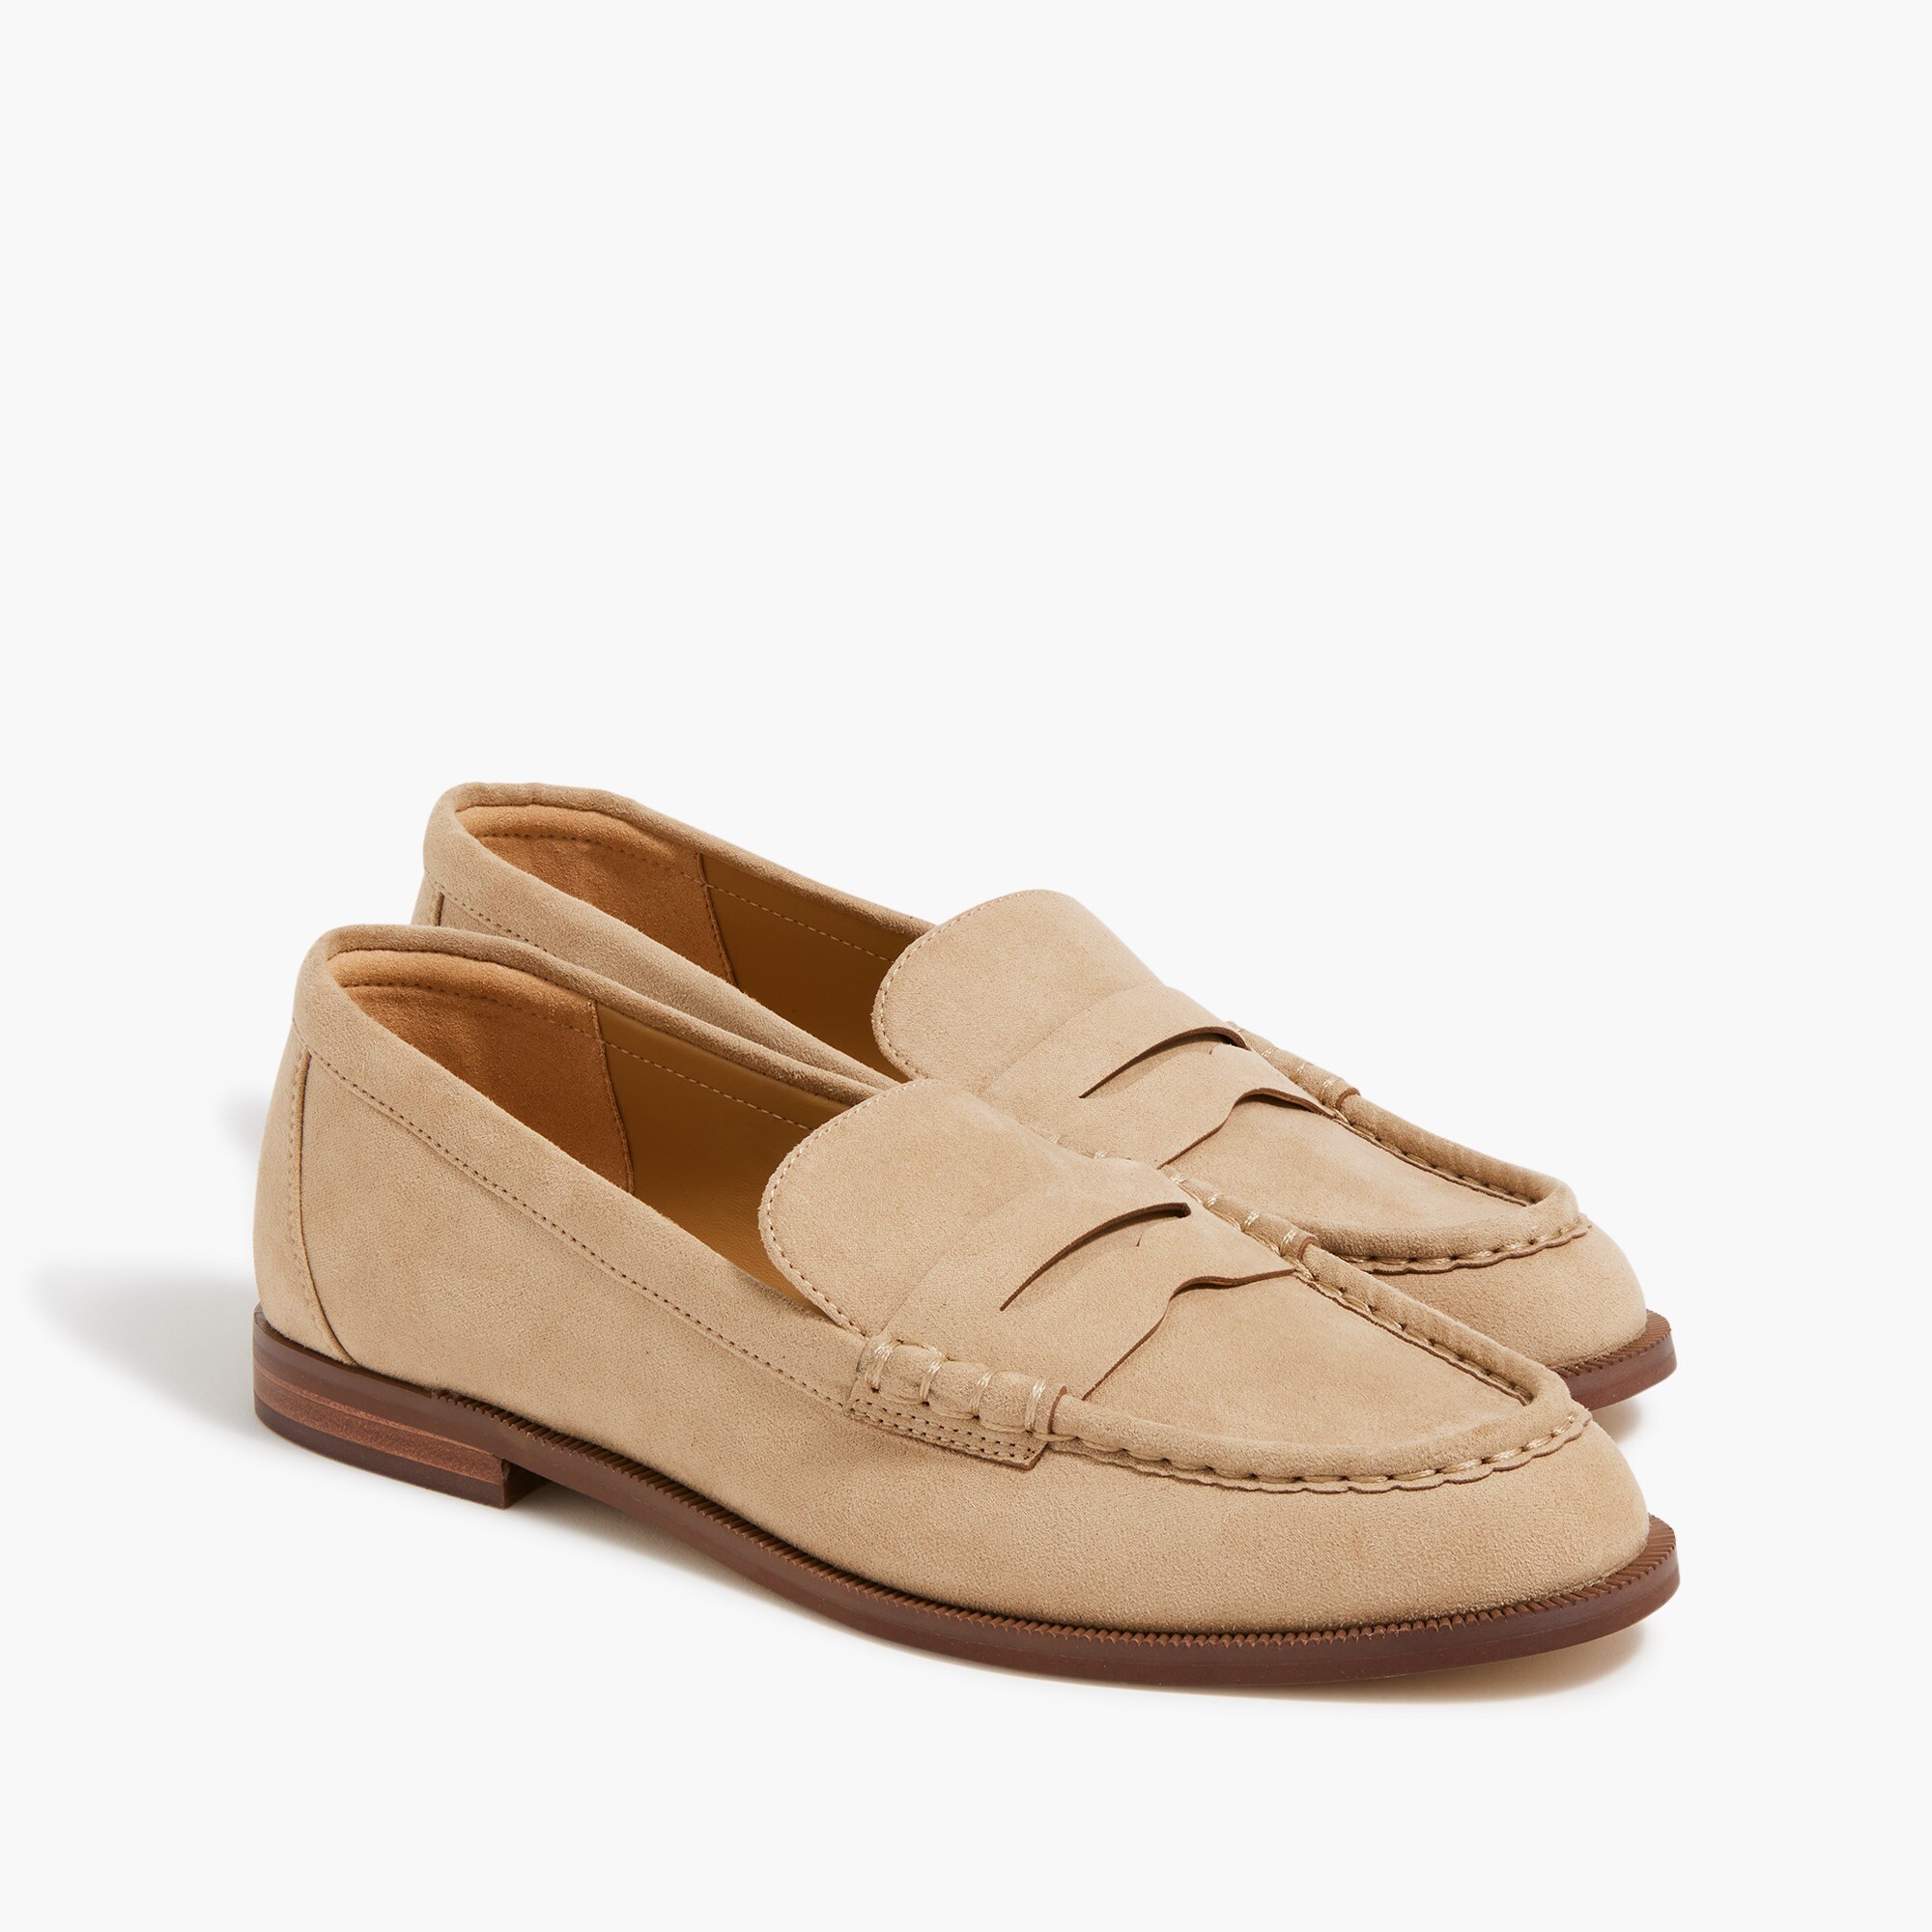  Penny loafers